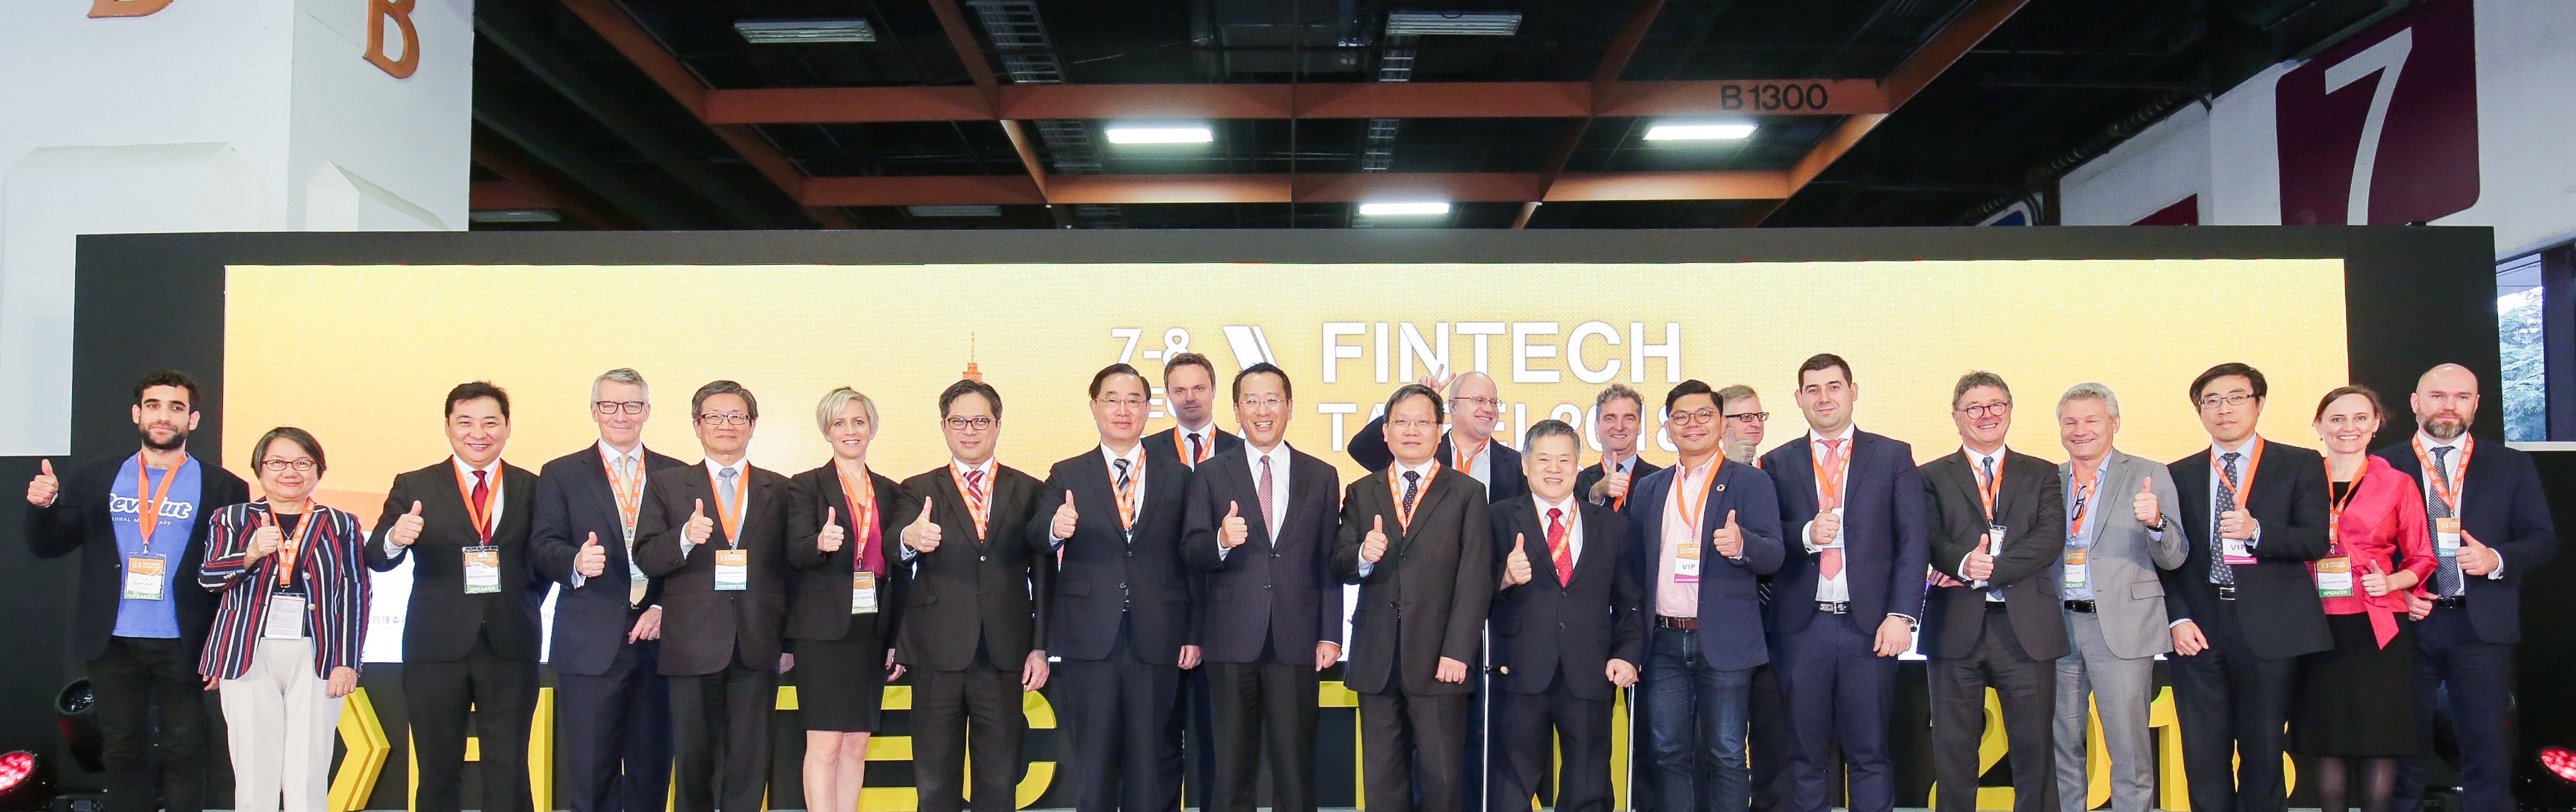 The “FinTech Taipei 2018” was held on December 7th and 8th. It was Taiwan’s first international FinTech trade show, and a total of 32,303 visitors flocked to the exhibition sections. The expo ended successfully as 200 Taiwanese and international FinTech startups, financial institutions, IT vendors, and universities from 11 countries including the US, UK, Australia, and Poland set up exhibition booths. The “FinTech Taipei” was a milestone for the financial sector in Taiwan, serving as a platform for domestic financial institutions and start-ups to showcase their ideas, and for businesses at home and abroad to meet and explore collaboration possibilities.